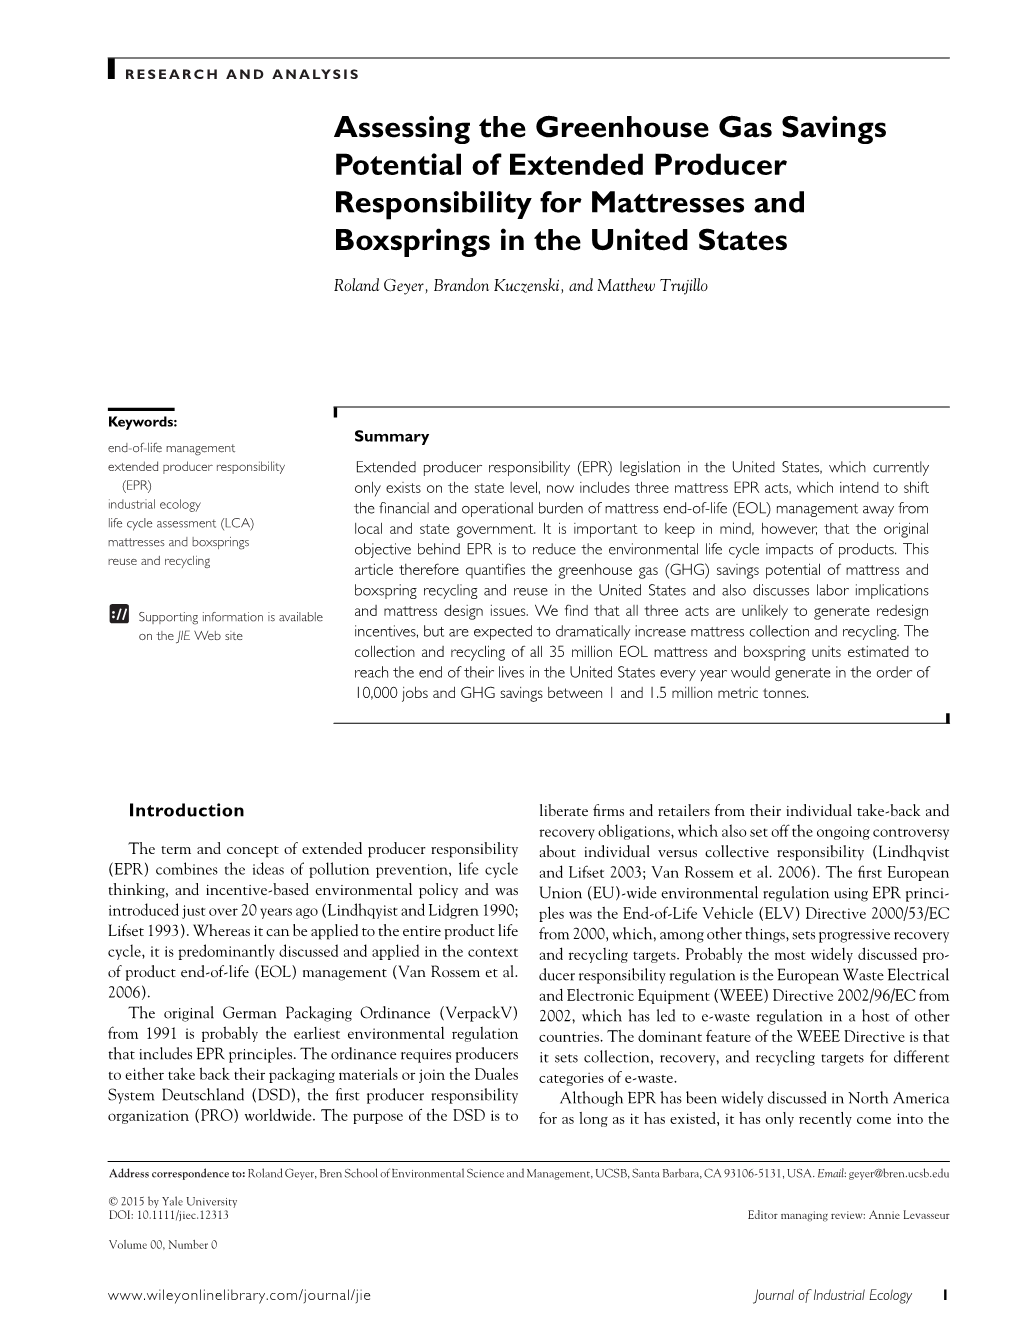 Assessing the Greenhouse Gas Savings Potential of Extended Producer Responsibility for Mattresses and Boxsprings in the United States